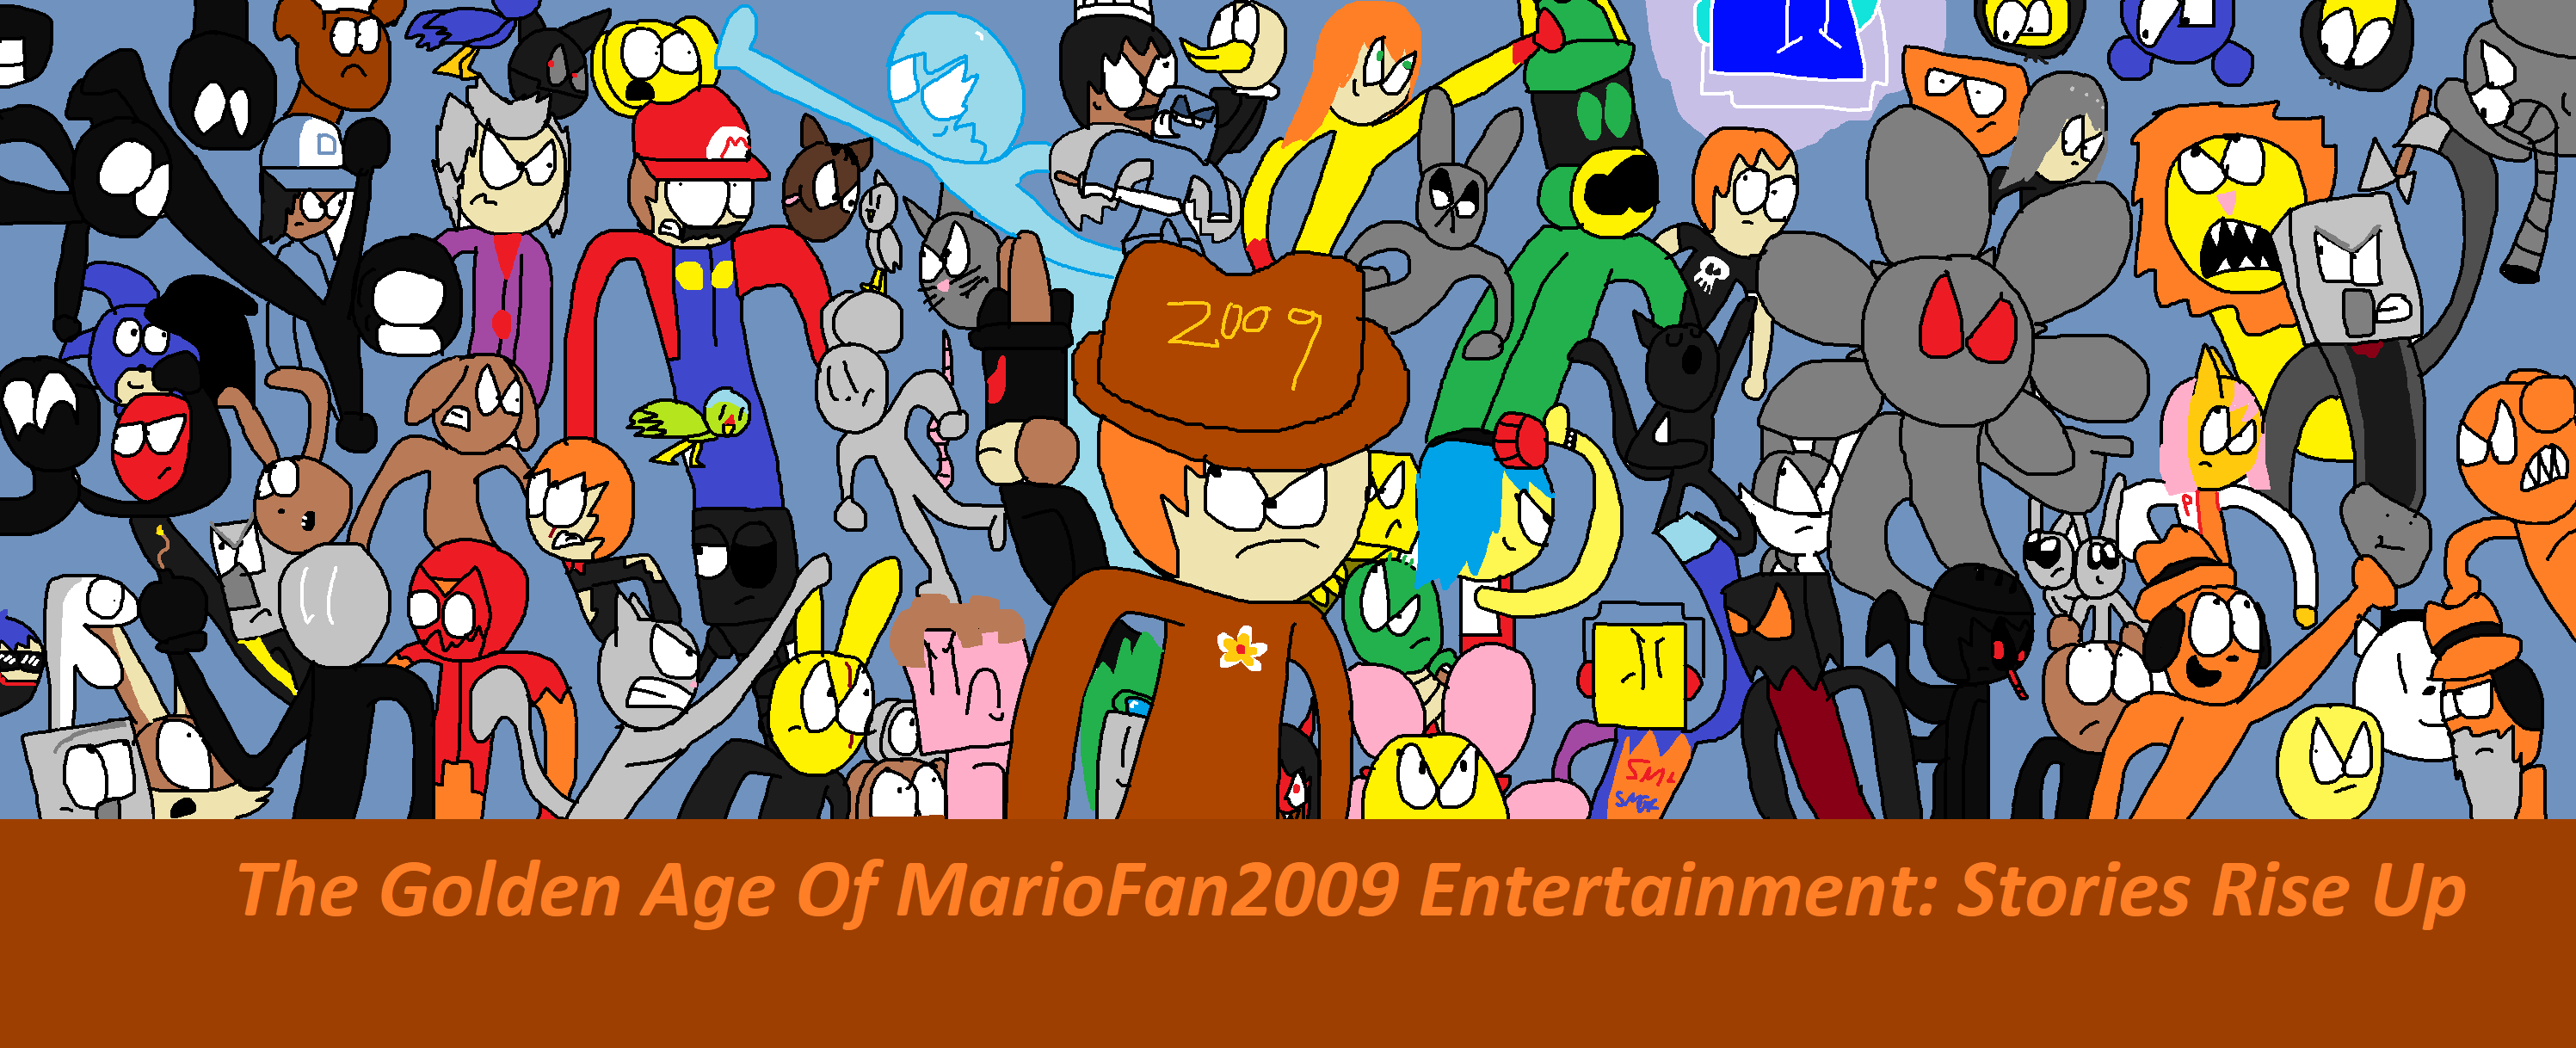 The Golden Age Of Mariofan2009 Entertainment Volume 4 Stories Rise Up Sml Fanon Wiki Fandom - rise up song imagine dragons roblox